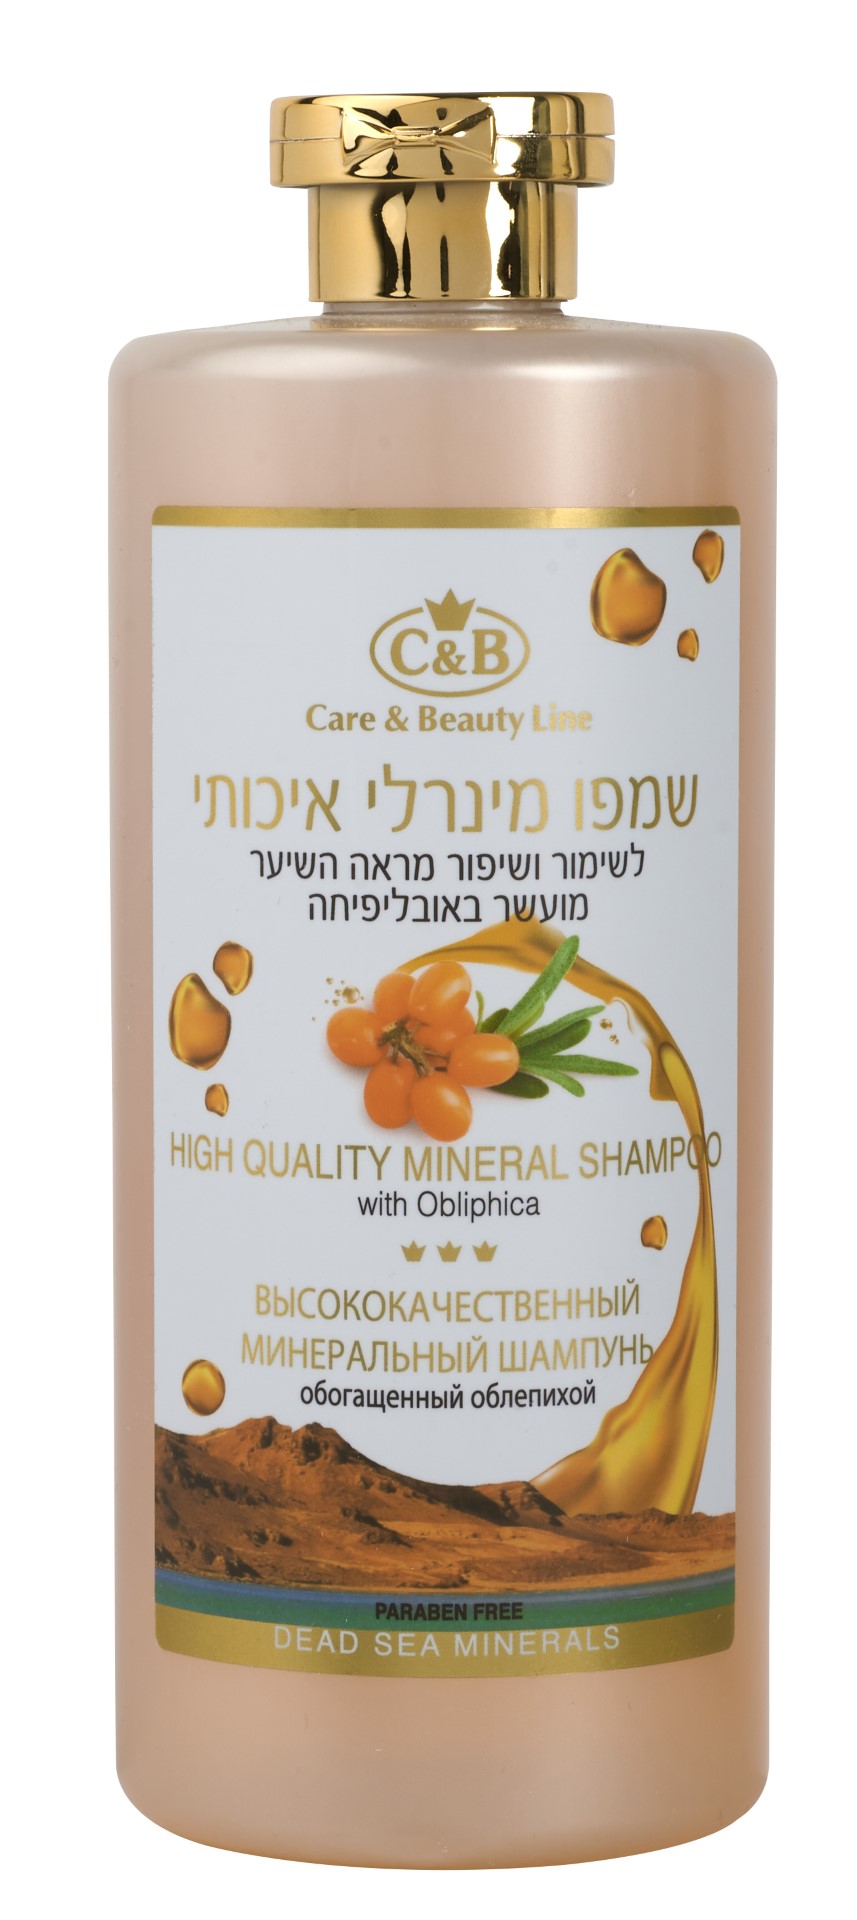 High Quality Mineral Shampoo with Obliphica